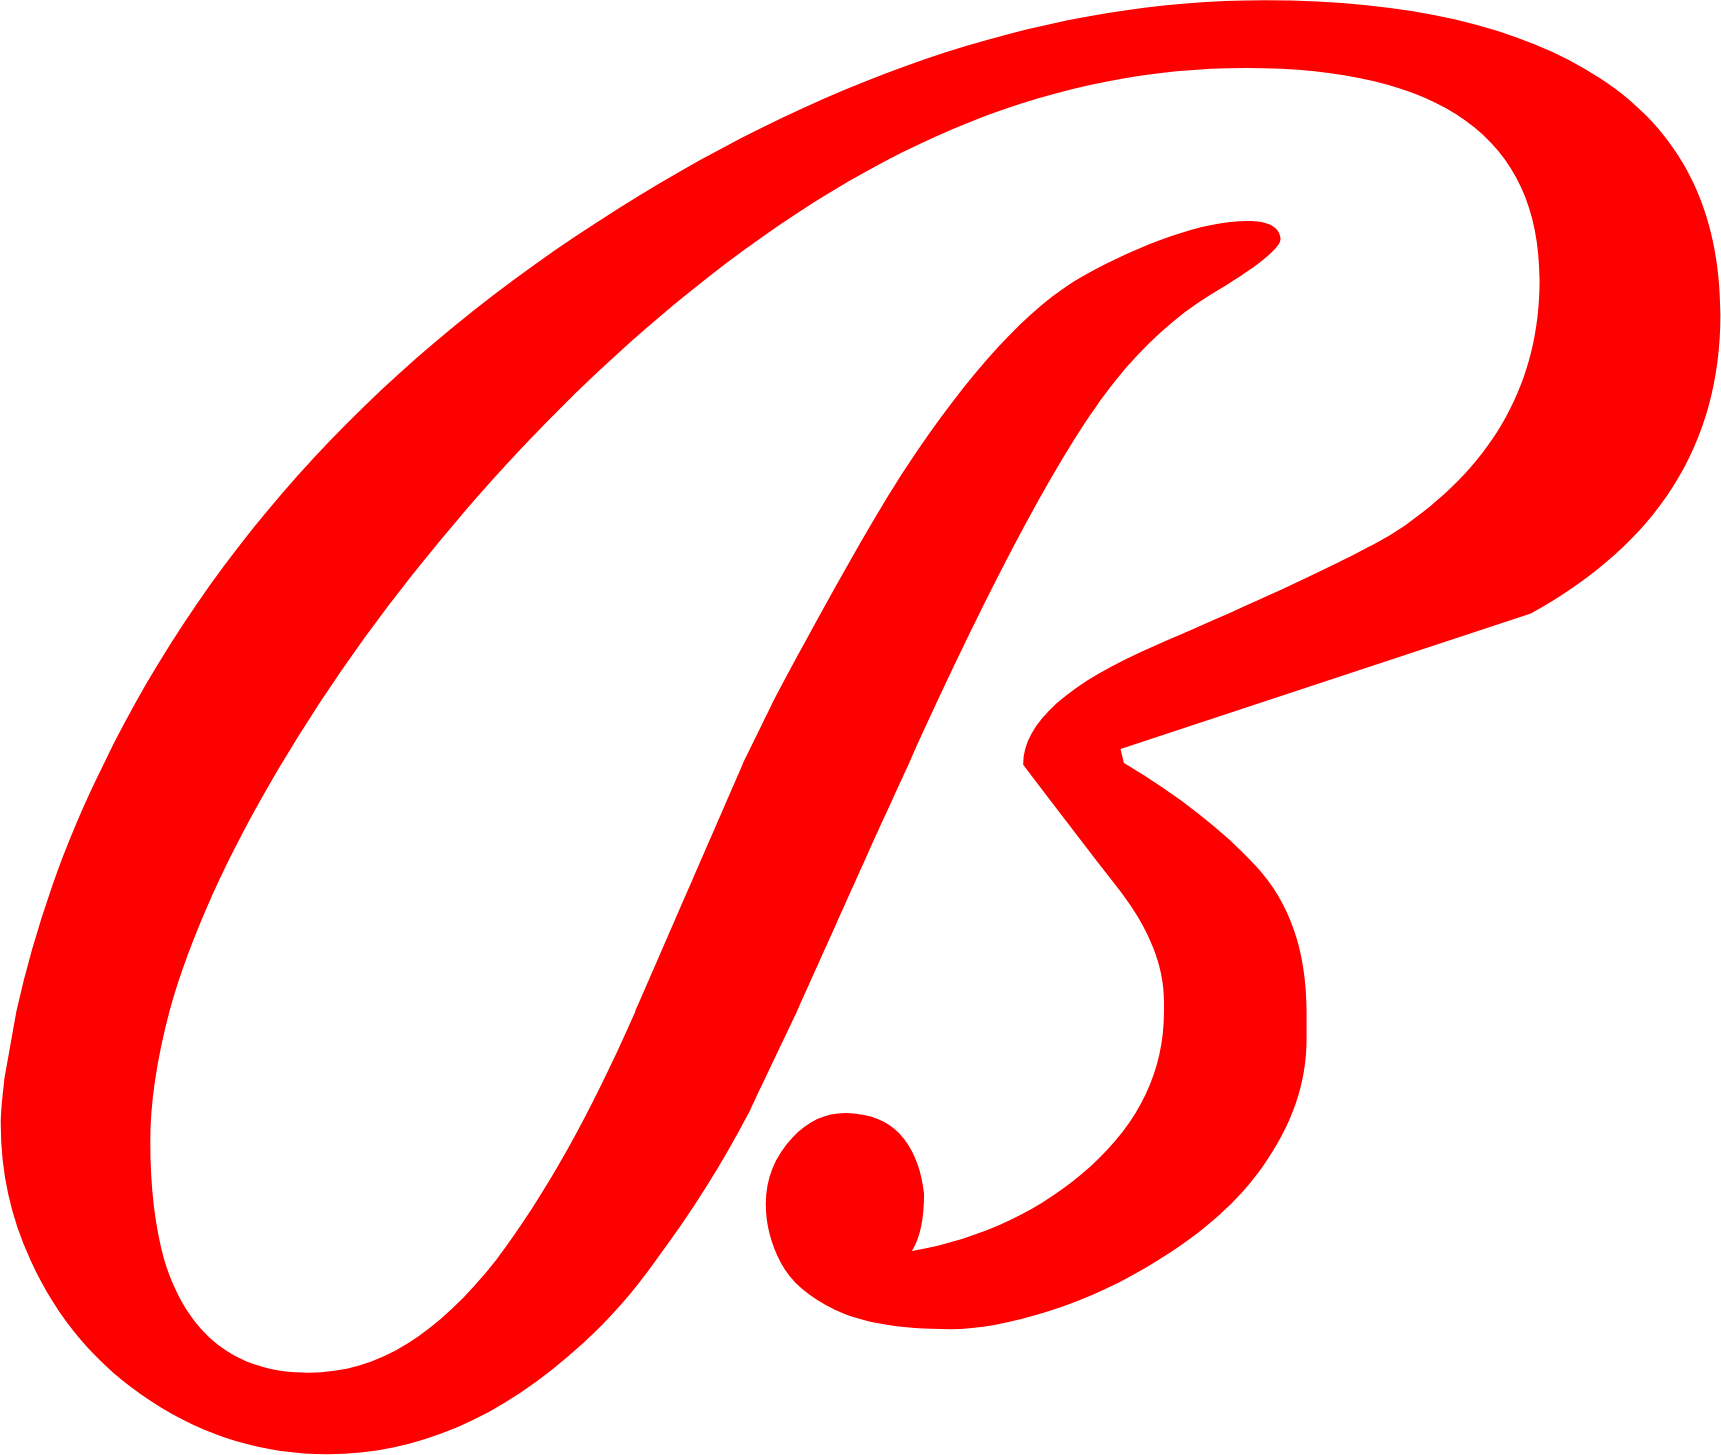 Bally's Corporation logo in transparent PNG and vectorized SVG formats